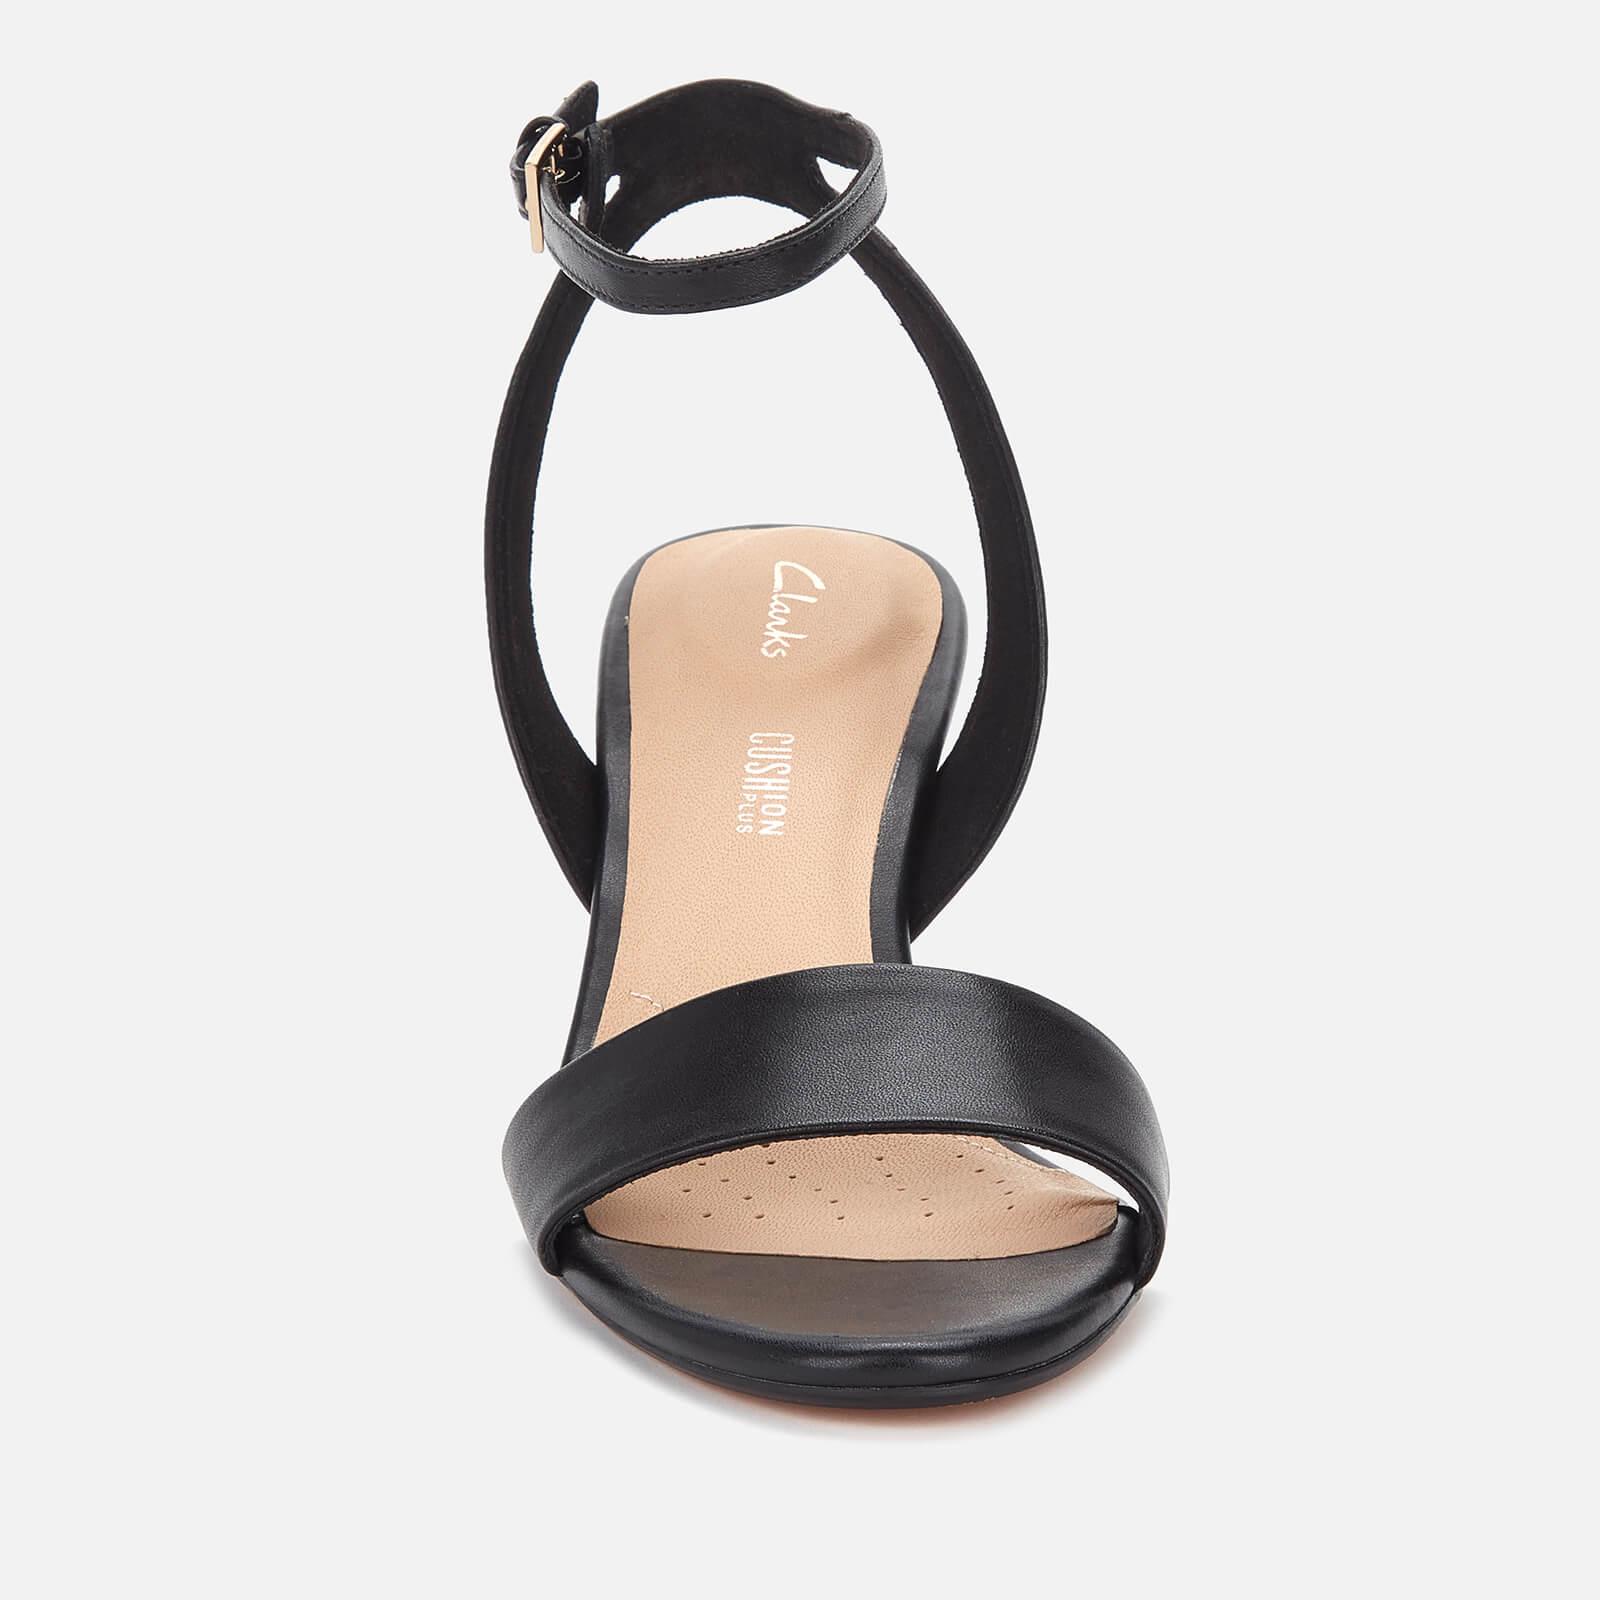 Clarks Amali Jewel Leather Barely There Mid Heels in Black | Lyst